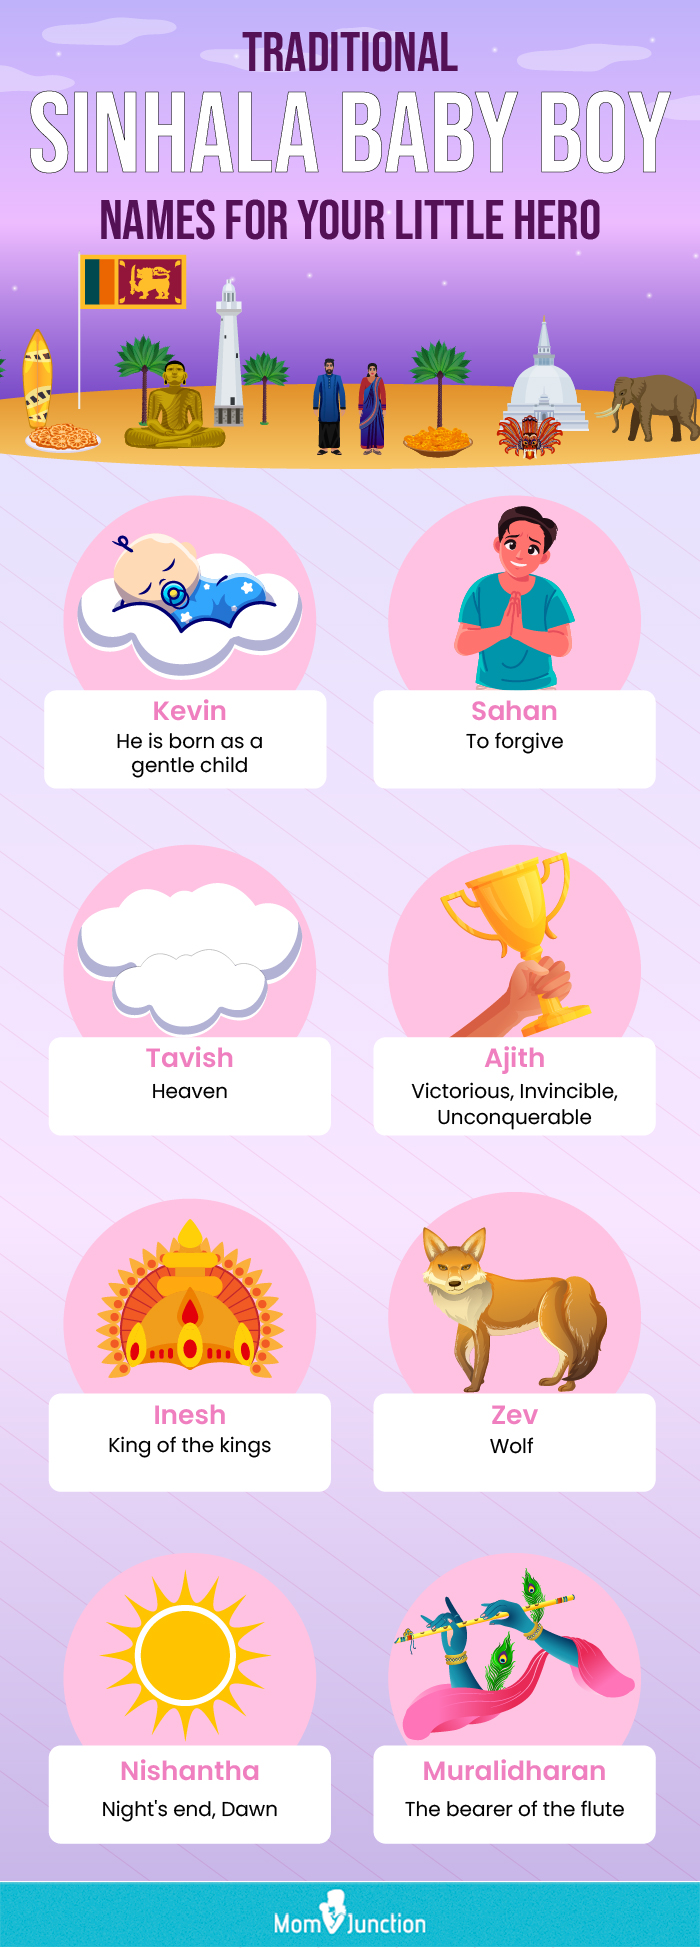 popular sinhala names with meanings for baby boys (infographic)